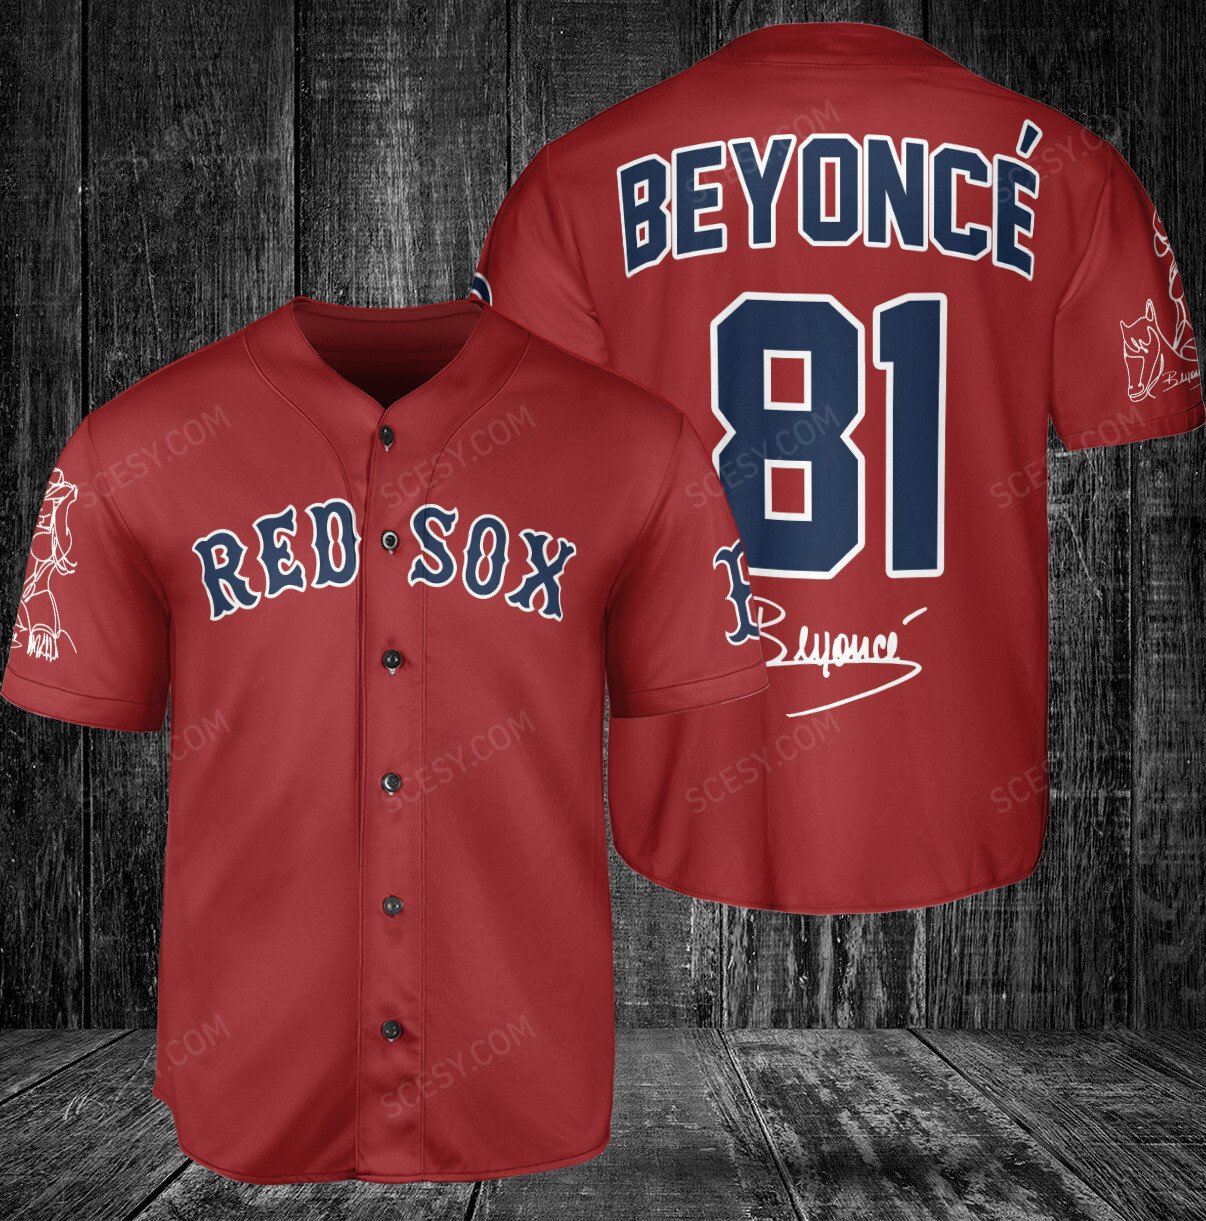 Get Your Red Sox Beyonce Baseball Jersey Now! - Scesy